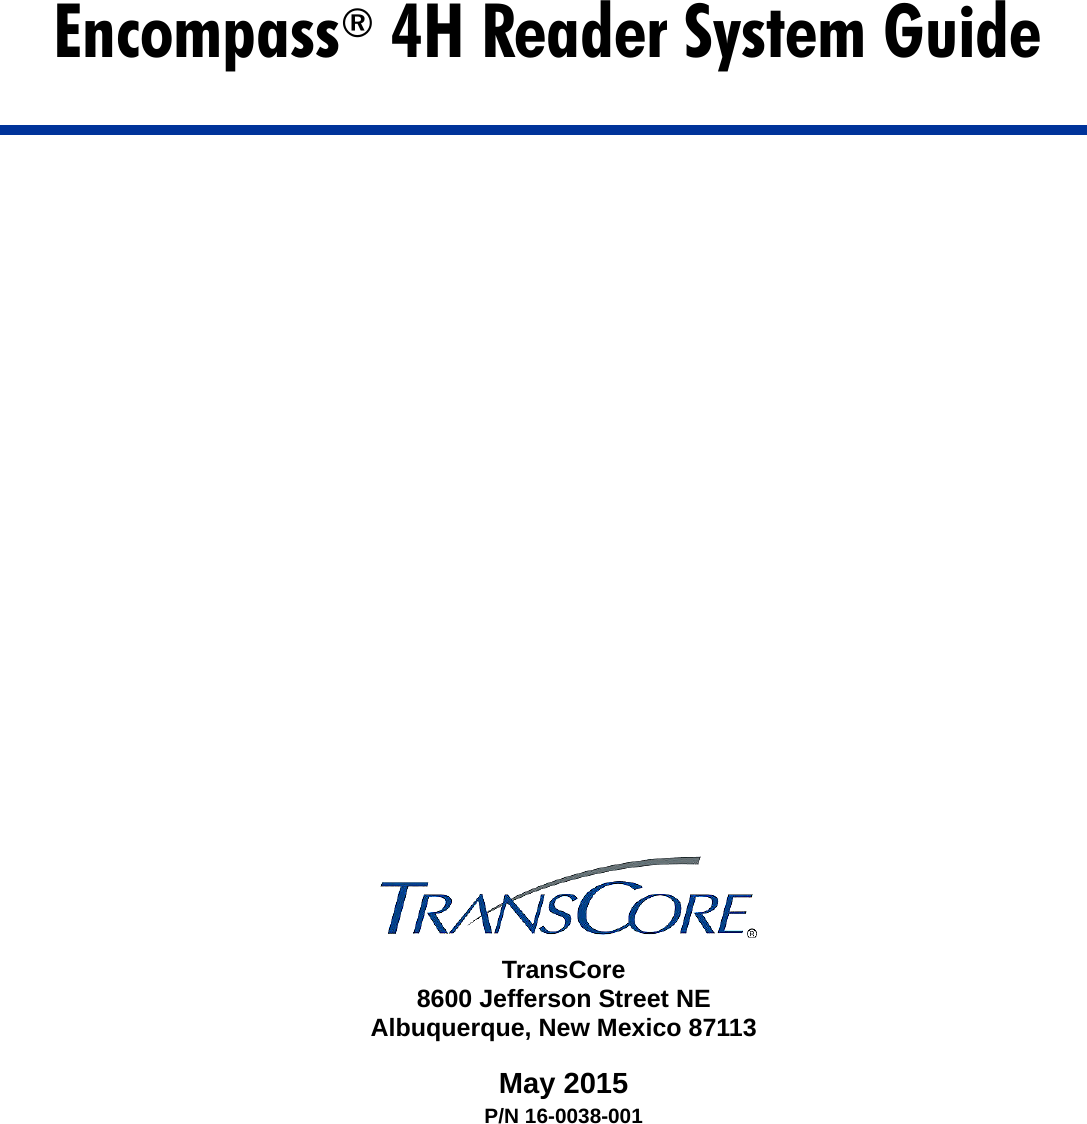 TransCore8600 Jefferson Street NEAlbuquerque, New Mexico 87113May 2015P/N 16-0038-001Encompass® 4H Reader System Guide 